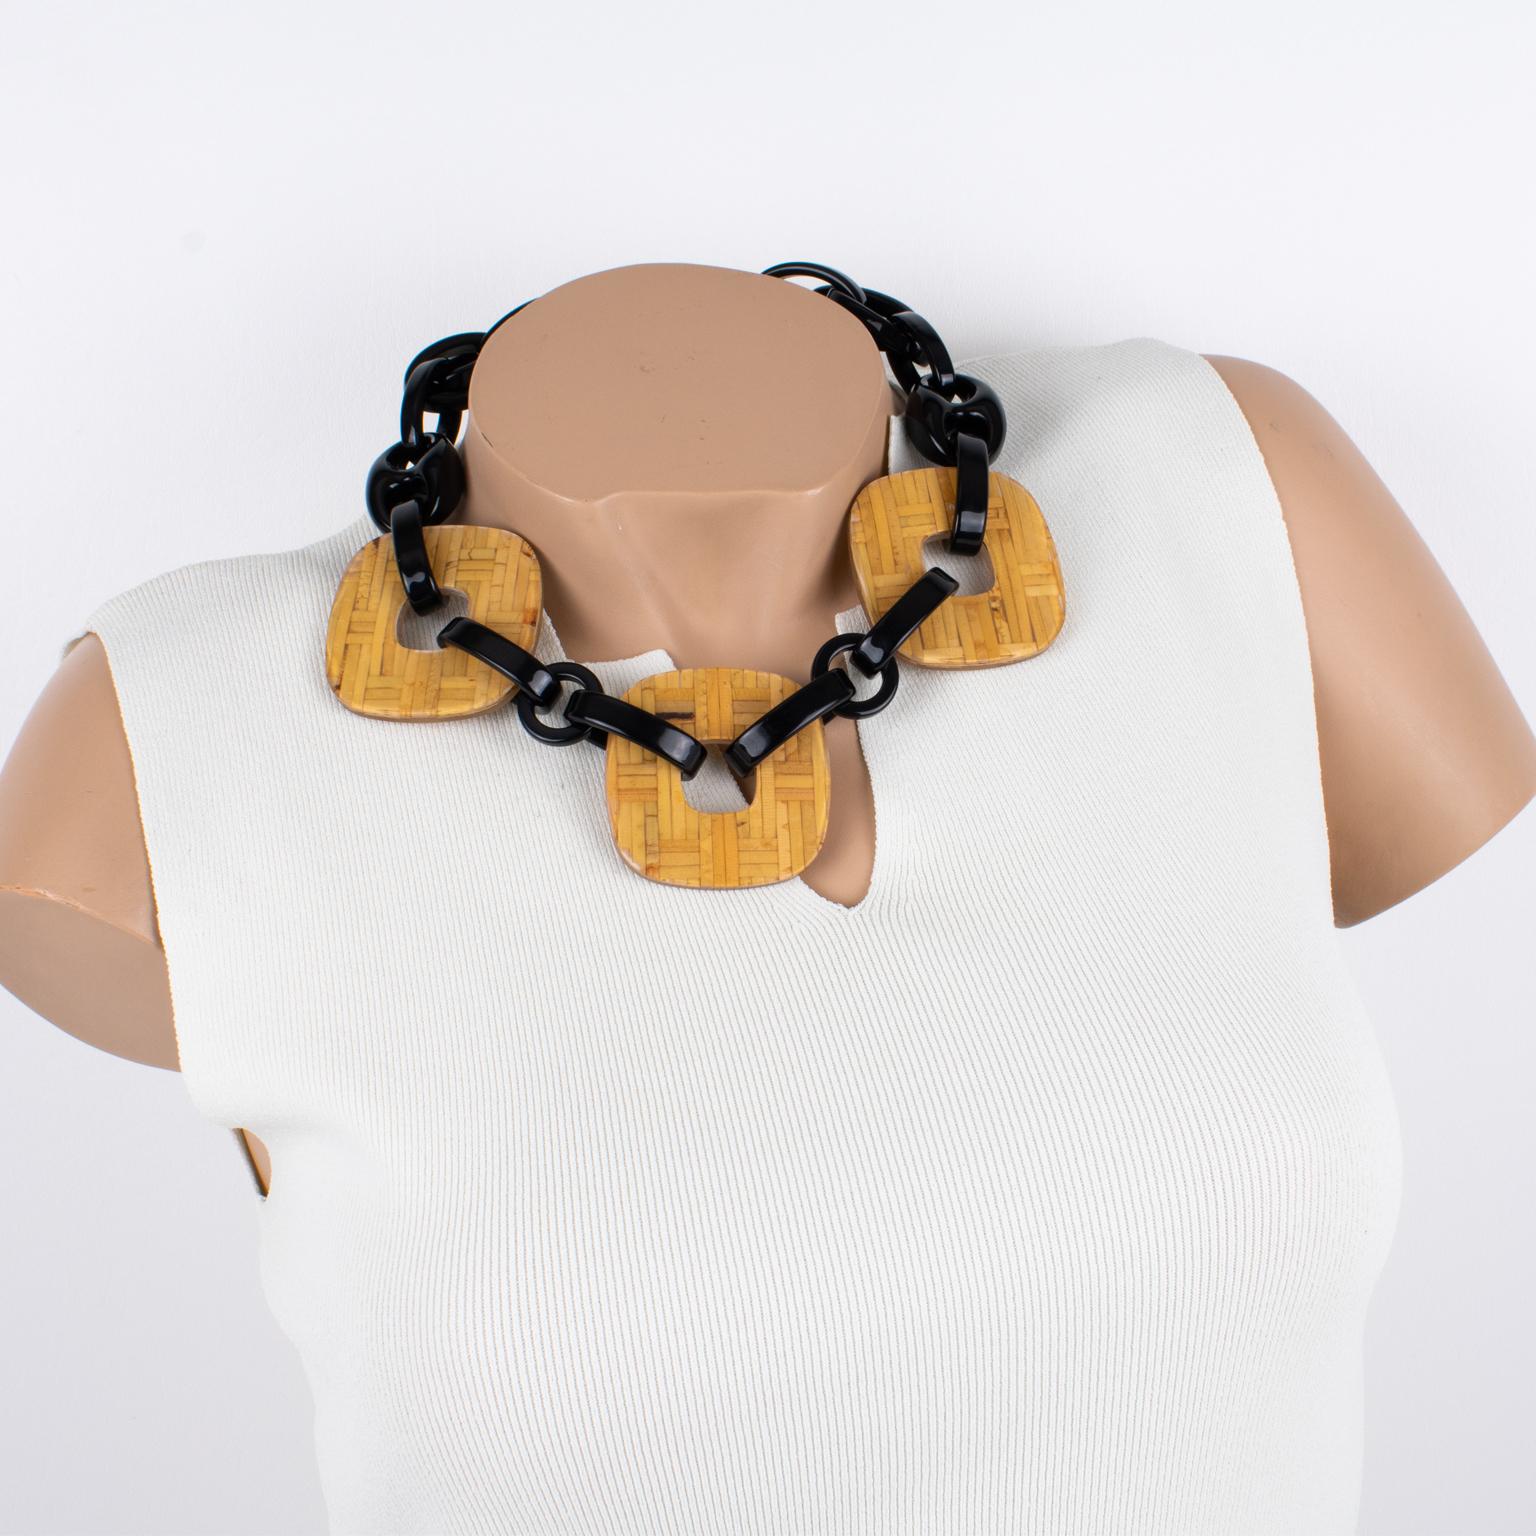 Angela Caputi designed this gorgeous made-in-Italy resin and Lucite choker necklace. The around-the-neck shape boasts black resin geometric elements contrasted with three flat square donuts in clear Lucite with embedded rattan or wicker. The piece